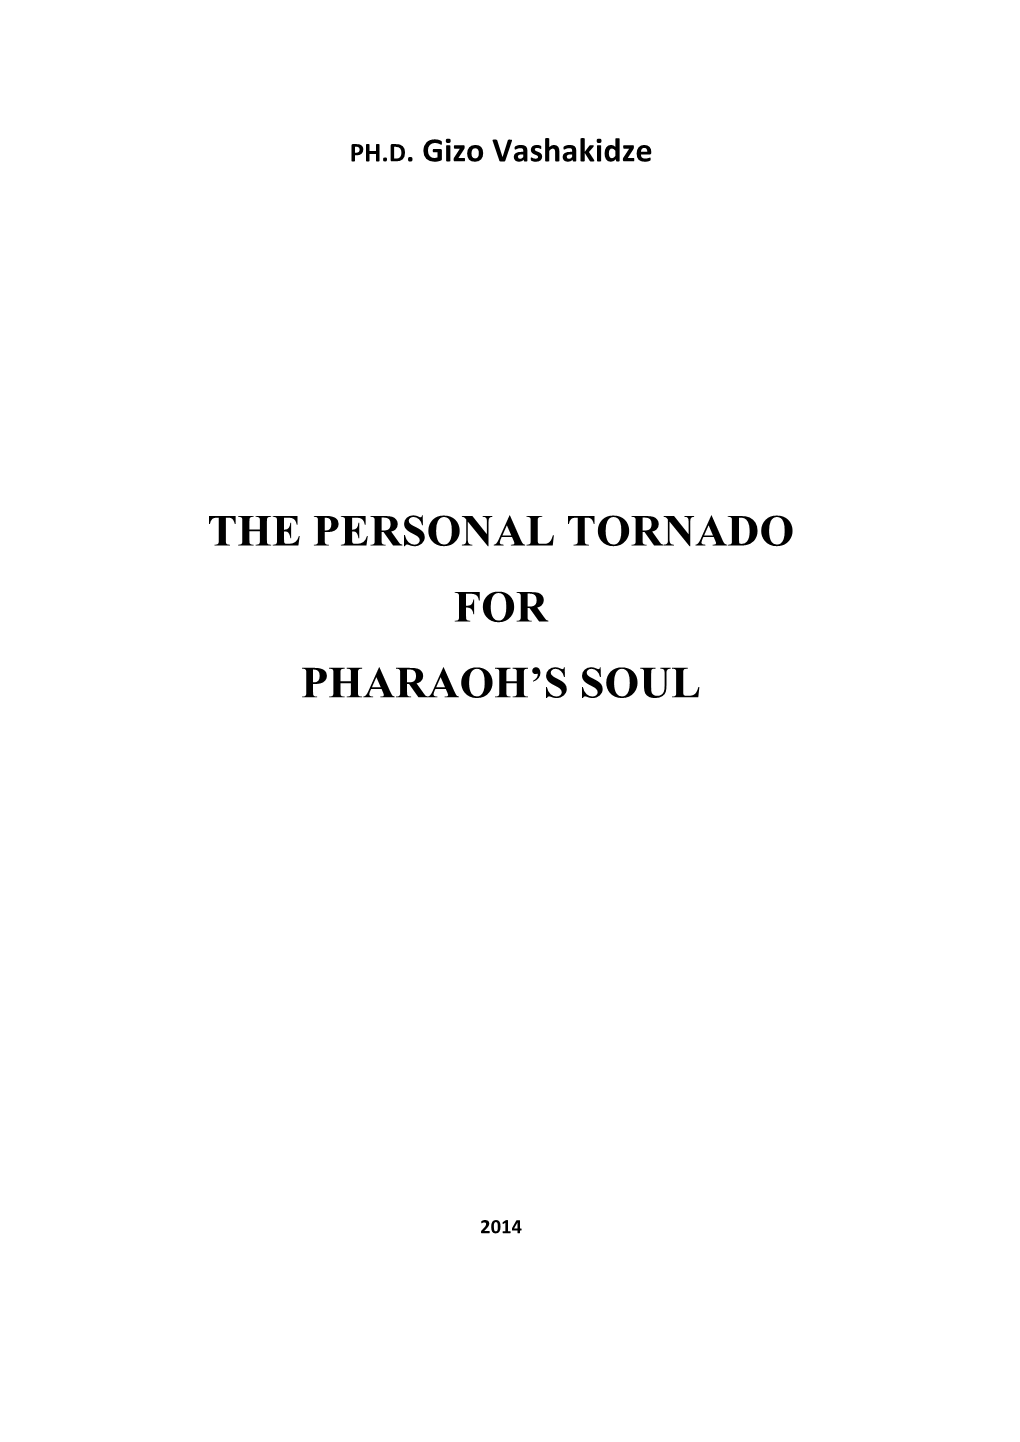 The Personal Tornado for Pharaoh's Soul